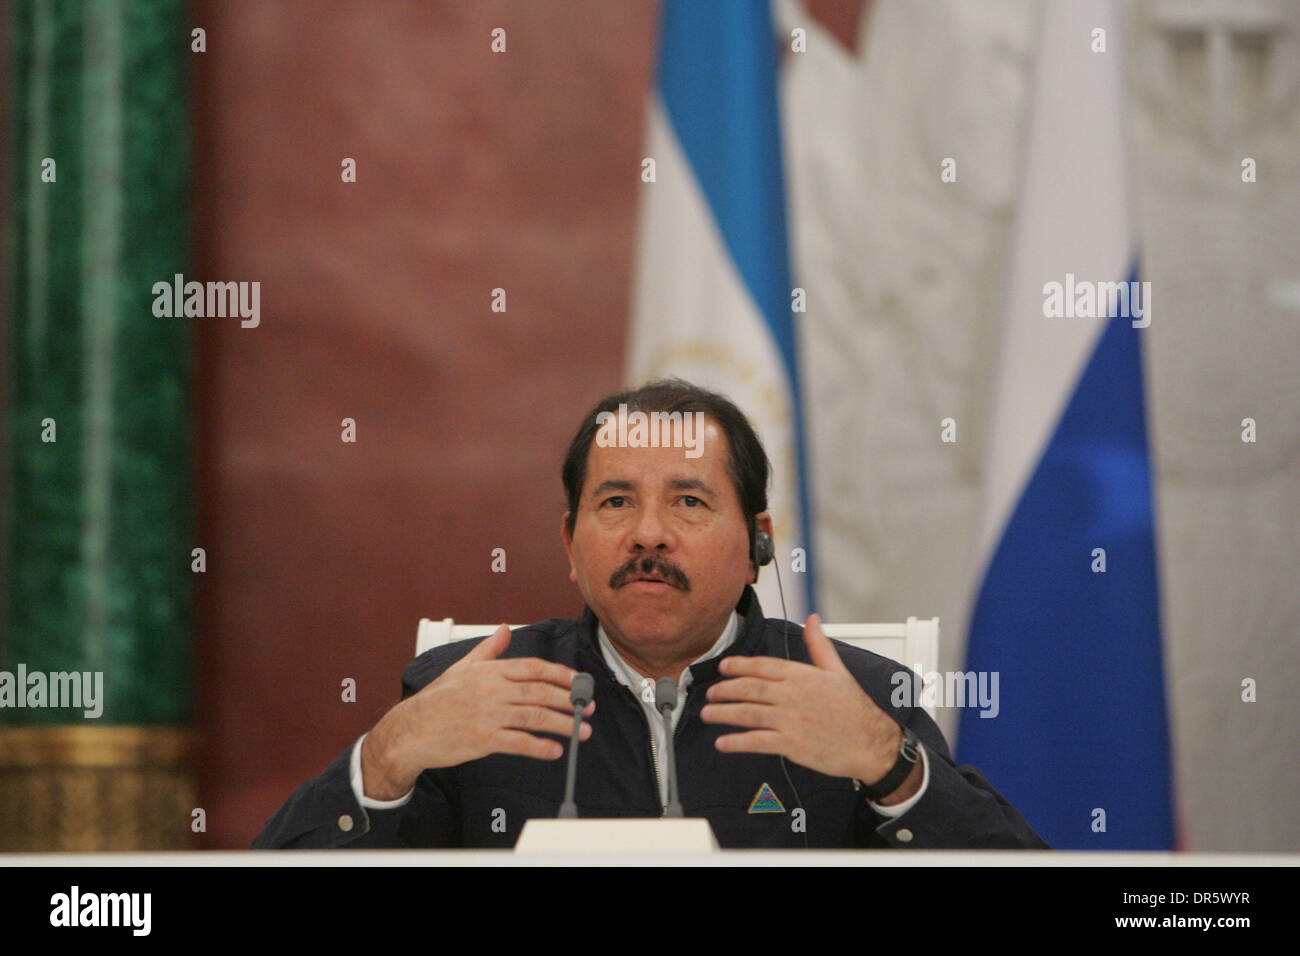 Dec 18, 2008 - Moscow, Russia - President of Nicaragua DANIEL ORTEGA (L) (Jose Daniel Ortega Saavedra) speaks at the meeting with Russian President in Kremlin. The leaders of two countries adopted joint statement about strategic partnership between Nicaragua and Russia.  (Credit Image: © PhotoXpress/ZUMA Press) RESTRICTIONS: * North and South America Rights Only * Stock Photo